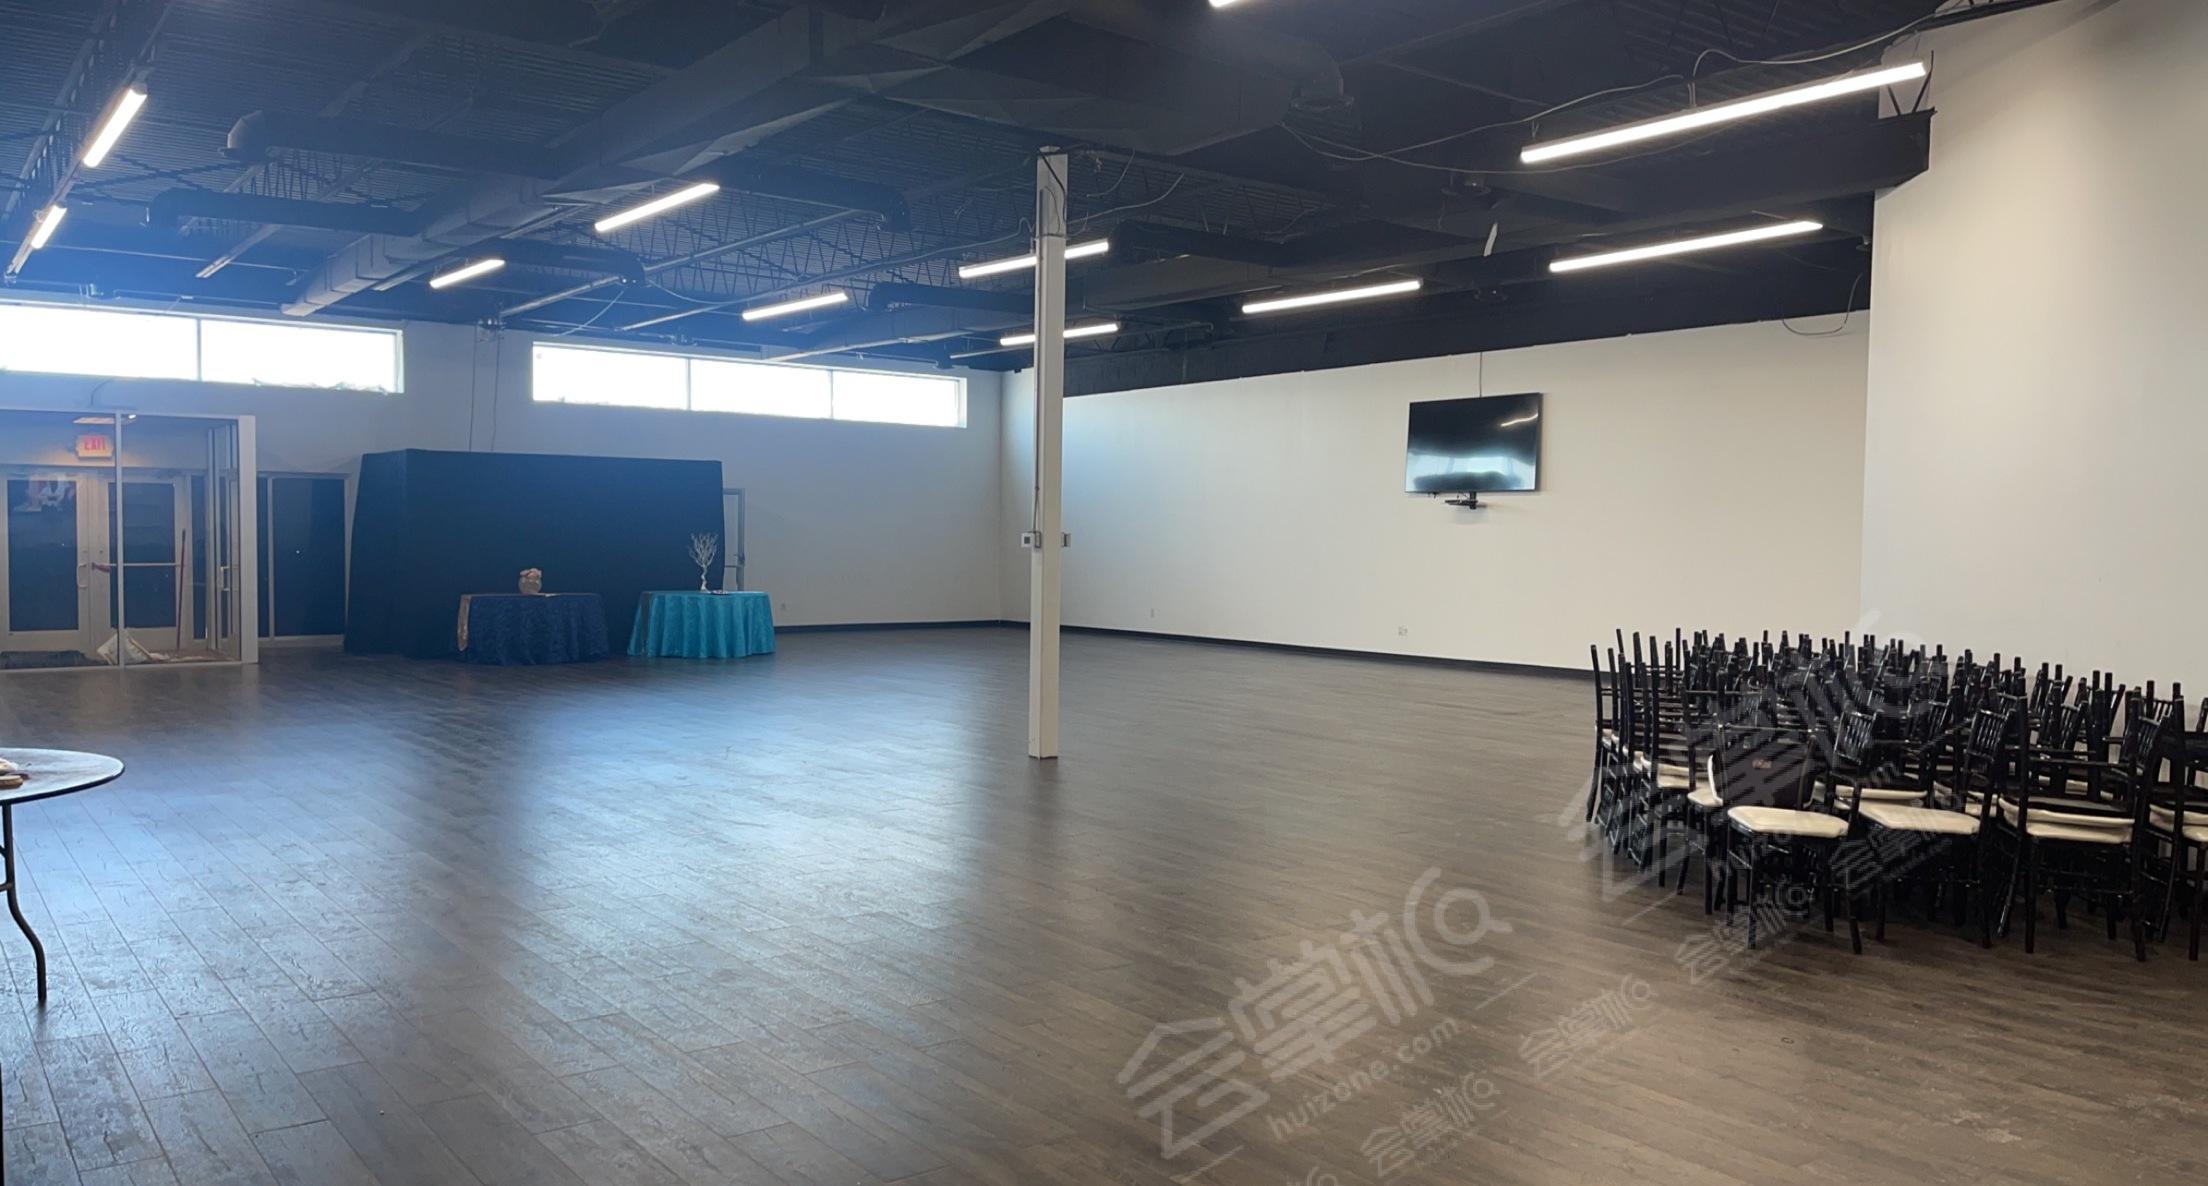 Brand New Event Space, Minutes from Downtown Detroit, Huge and really nice open space for all occasions